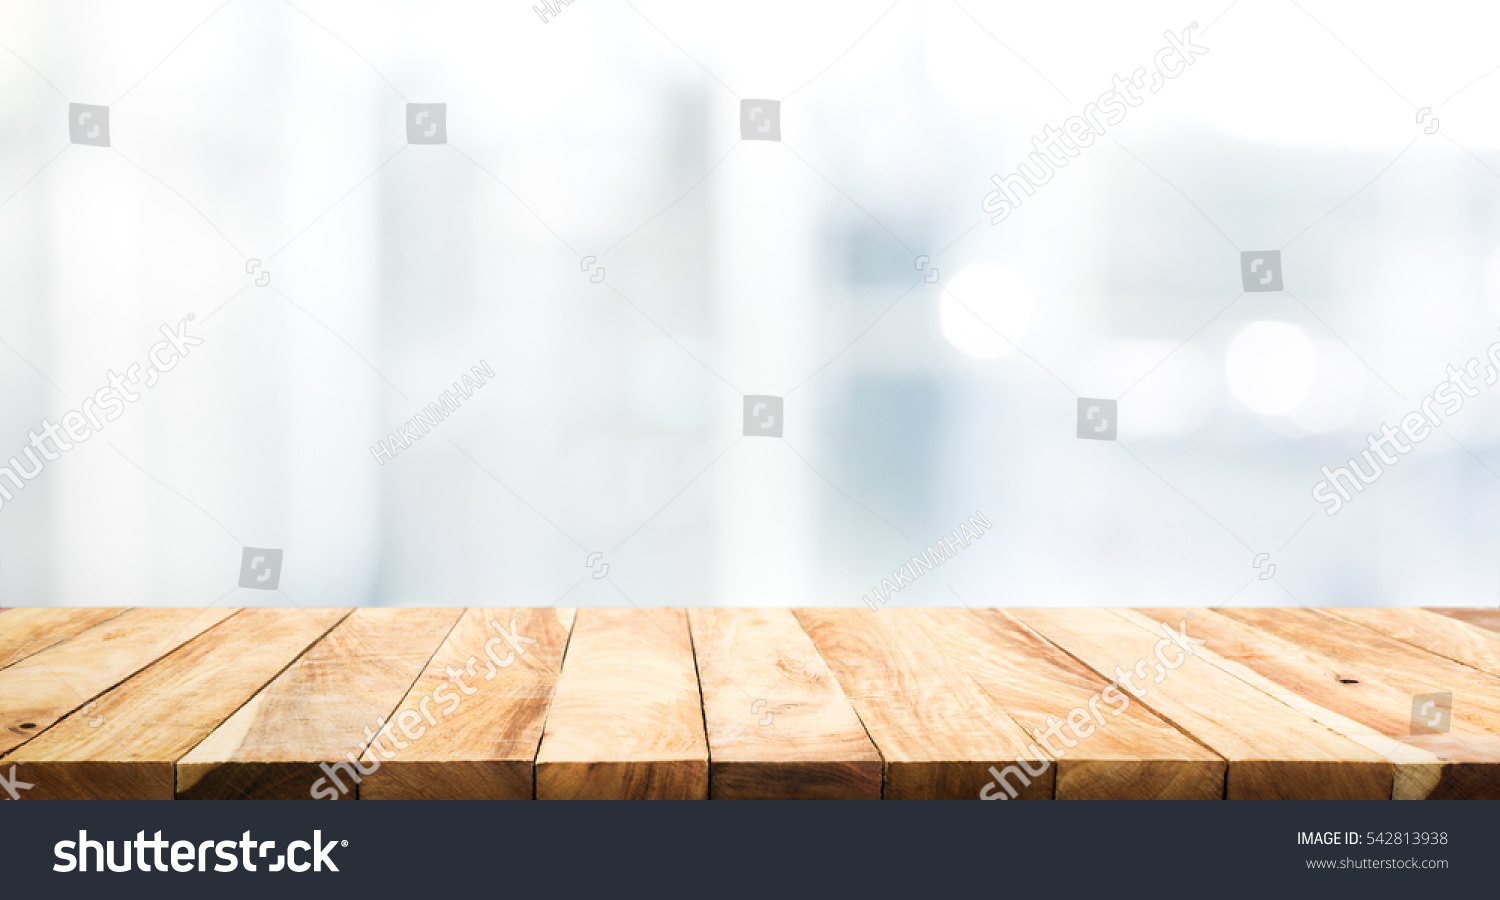 Wood table top on blur glass window wall building background.For montage product display or design key visual layout background. #542813938